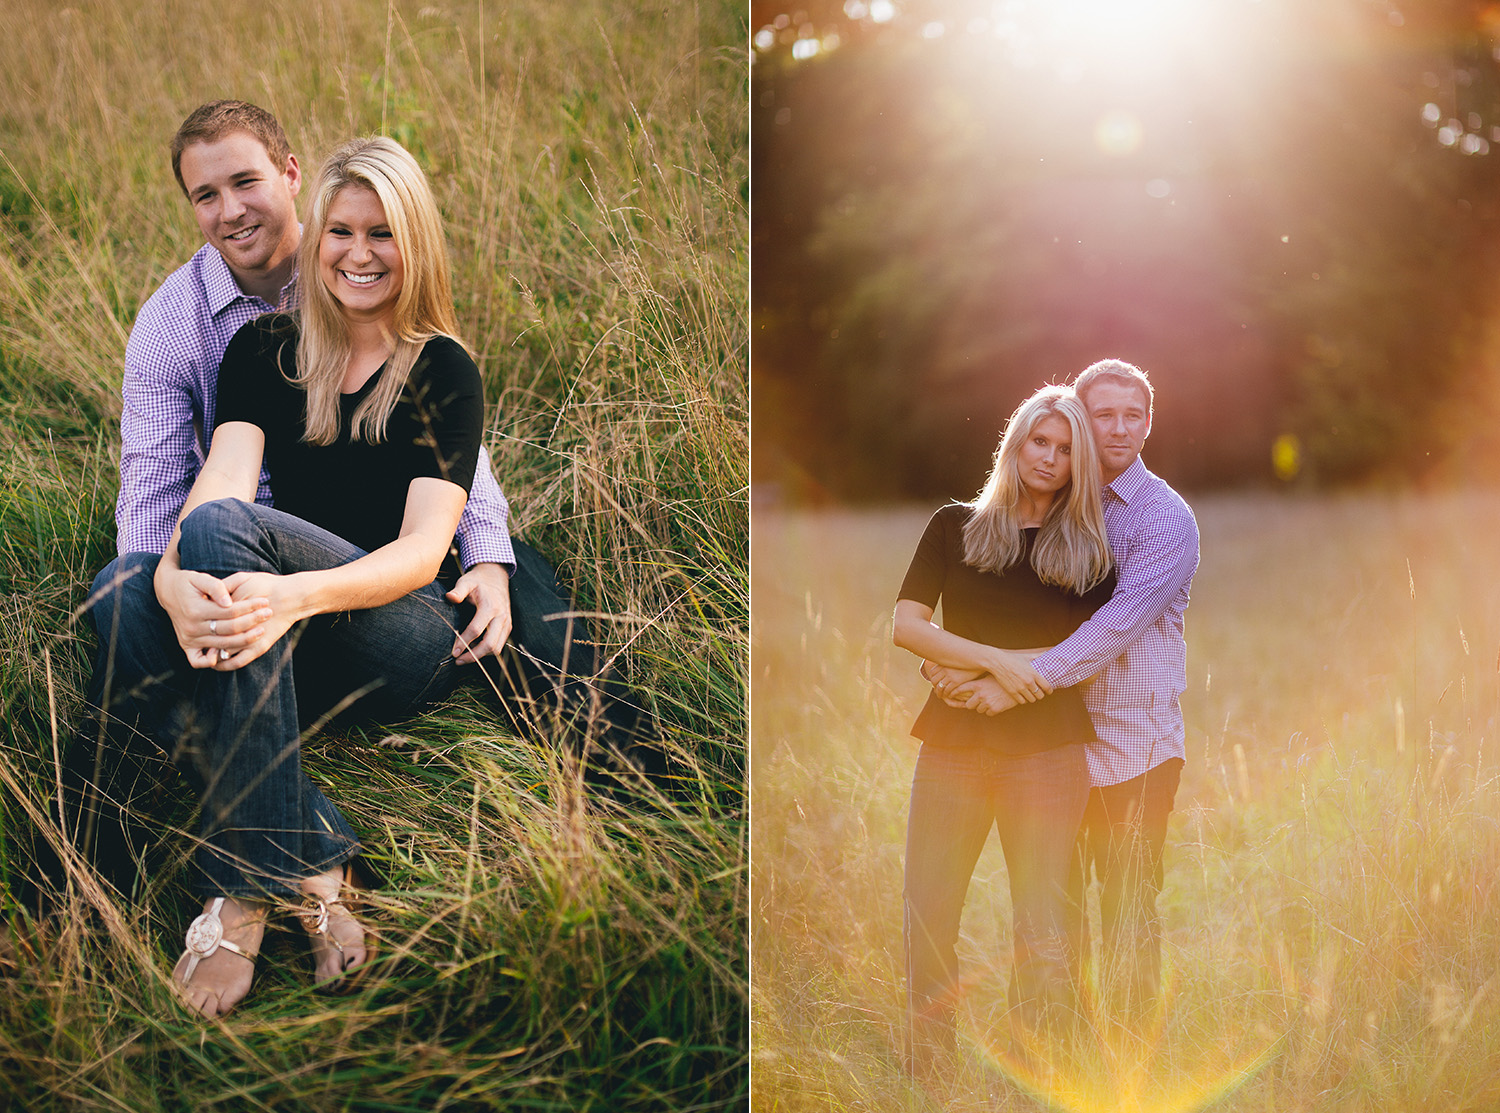 Cleveland Engagement Photographer- too much awesomeness - Becca and Tommy Image03.jpg